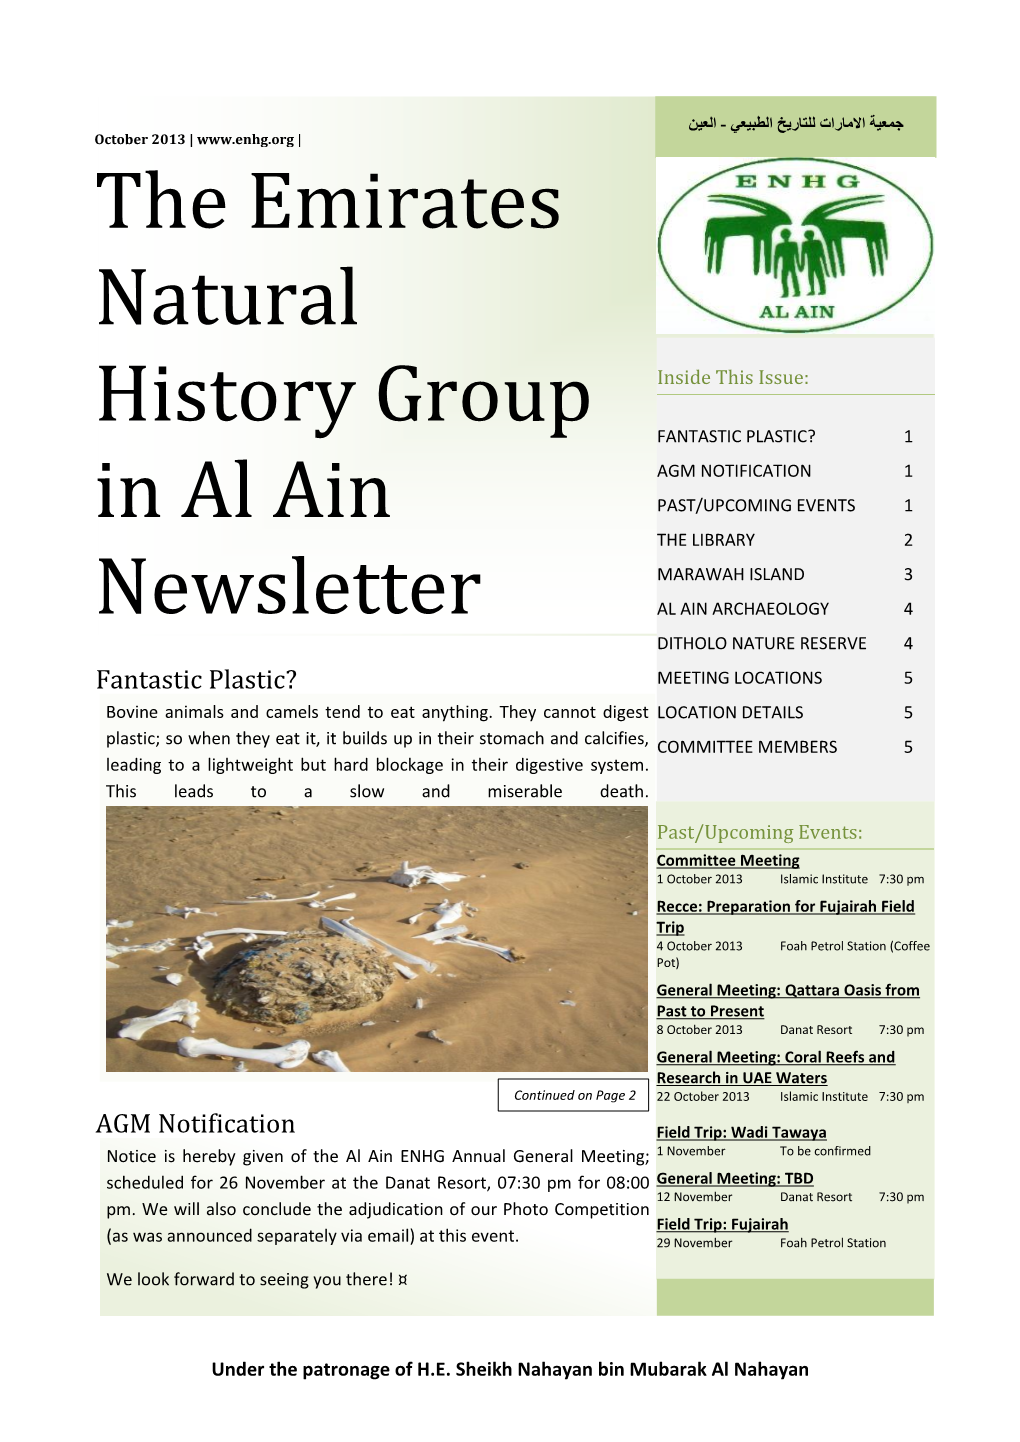 The Emirates Natural History Group in Al Ain Newsletter